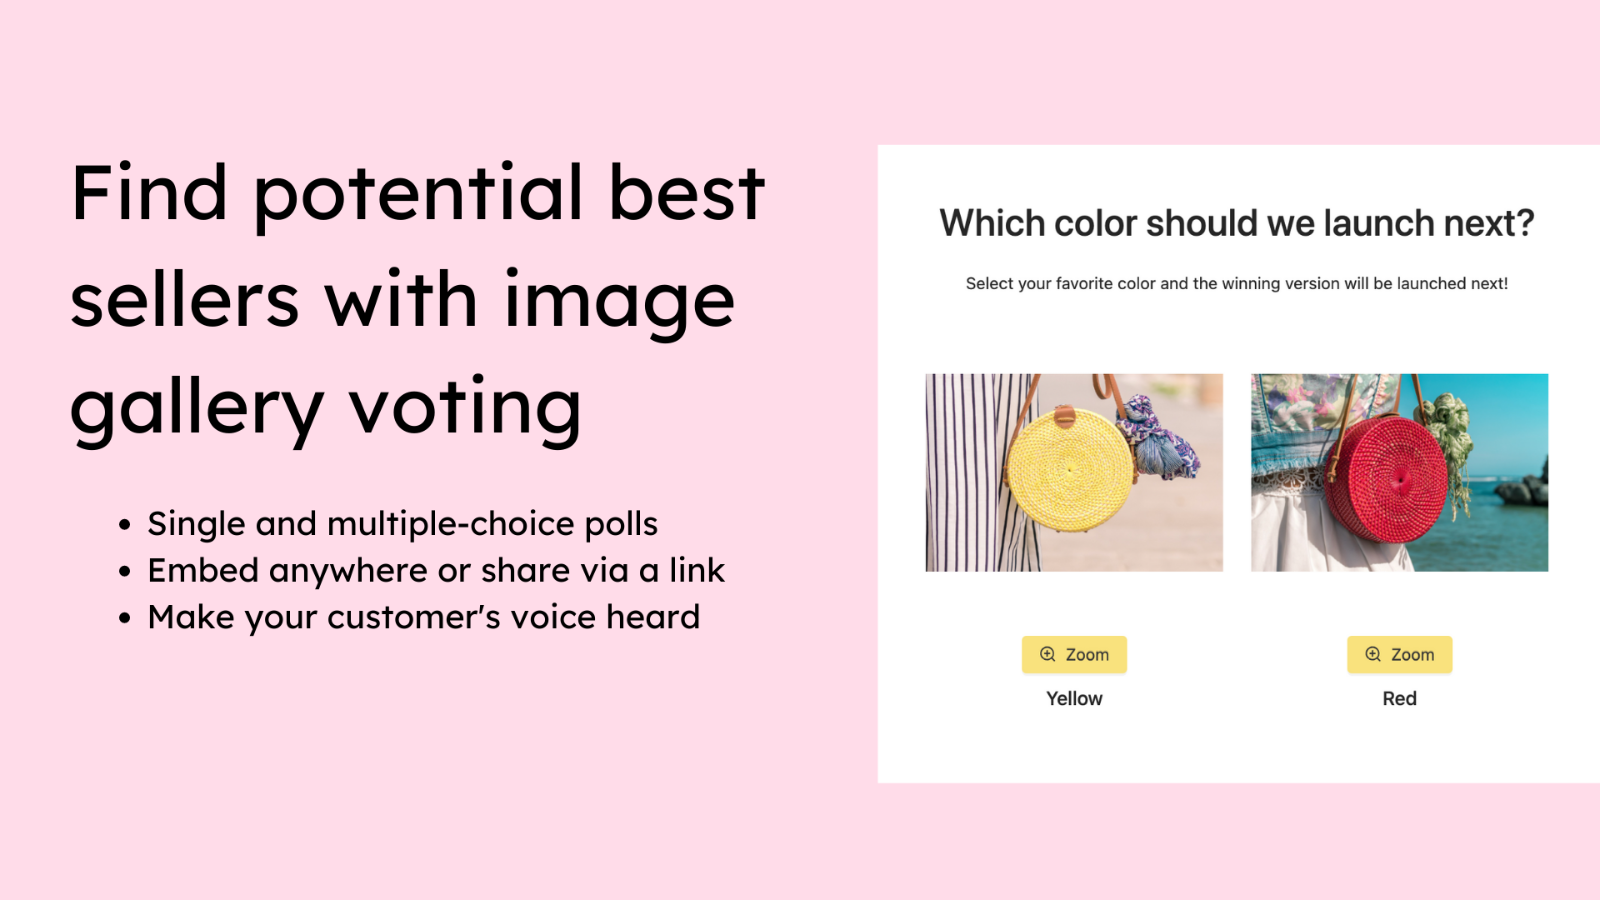 Image voting campaign